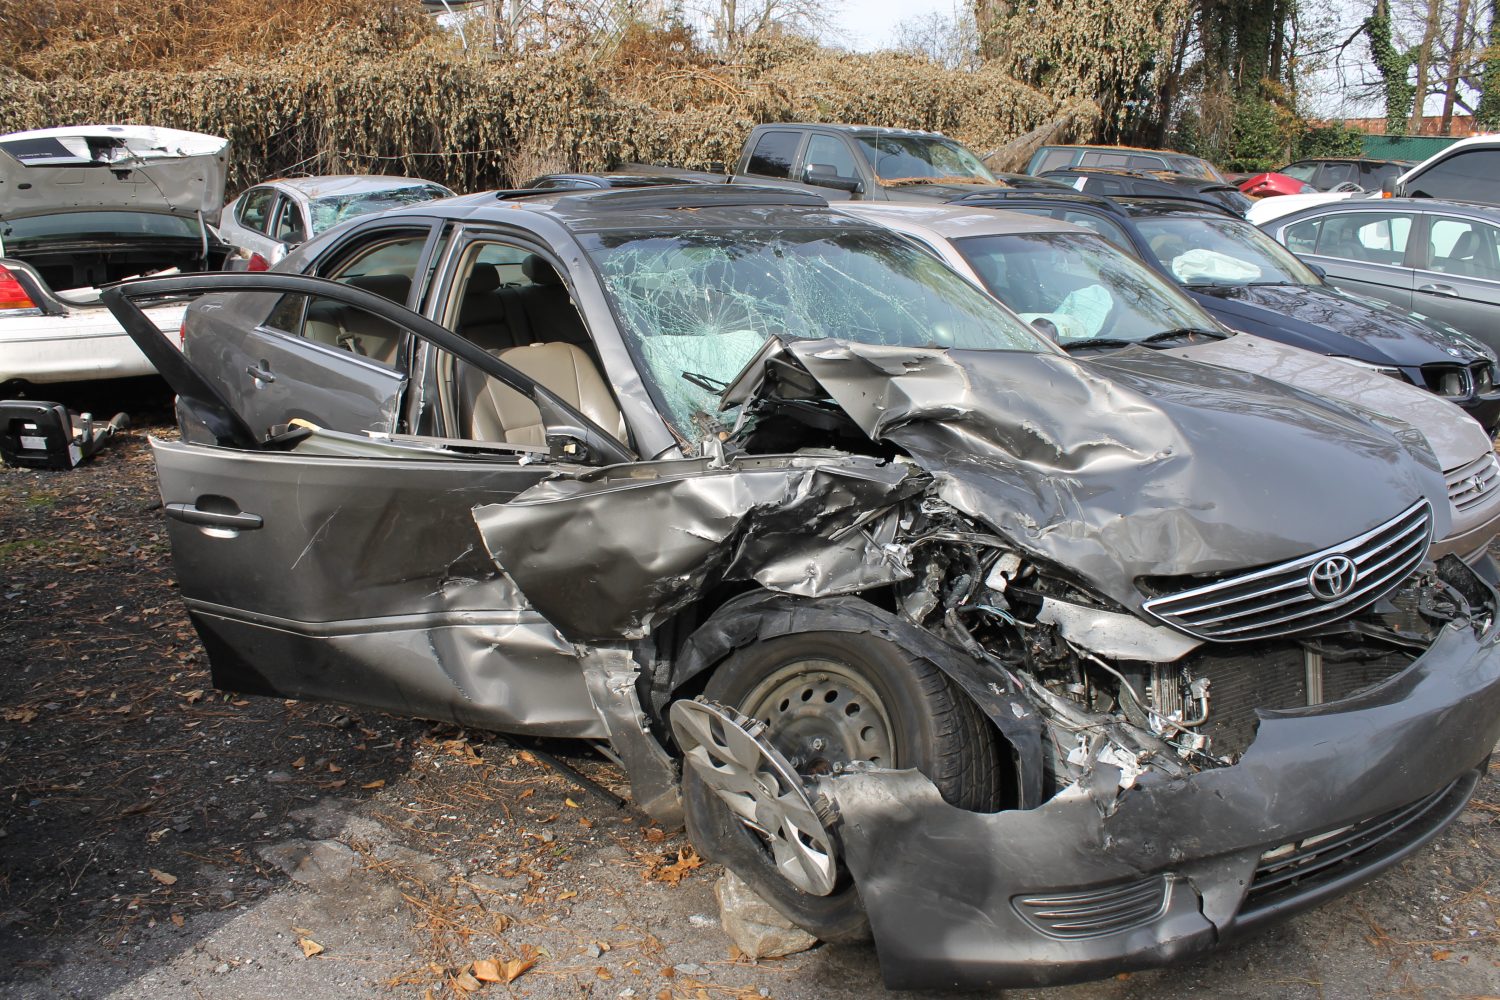 Midtown Collision and Service holds cars that get into terrible accidents and can not be driven away from the scene. The cars shown were put into the lot after being crashed by teen drivers.